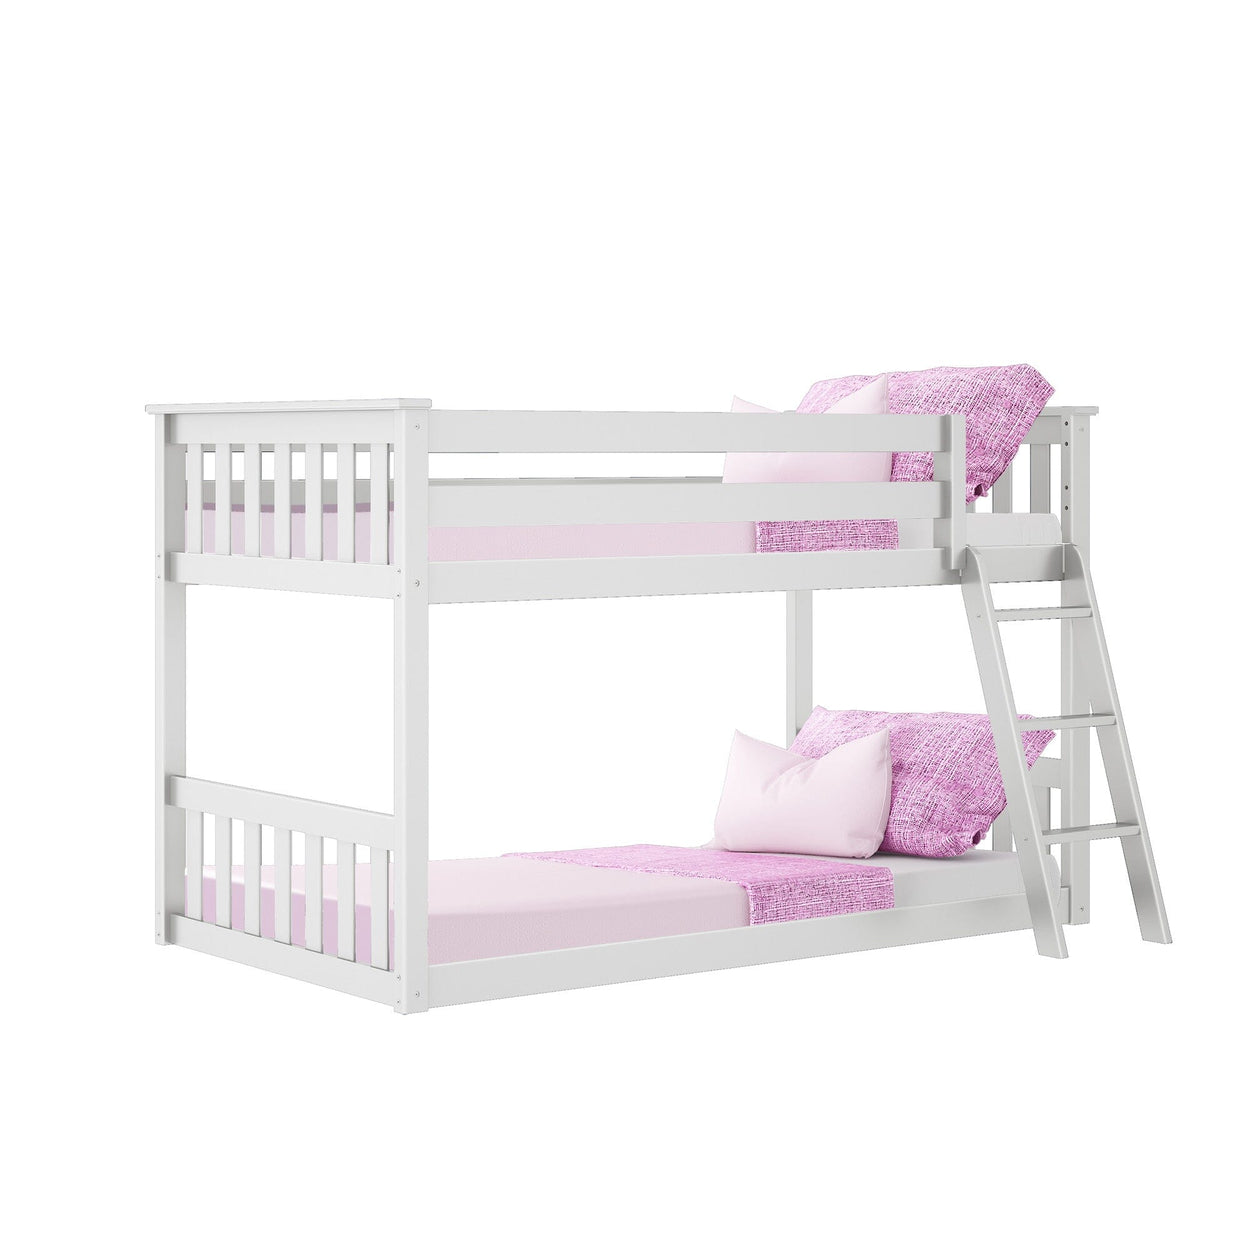 180214-002 : Bunk Beds Twin over Twin Low Bunk Bed, White